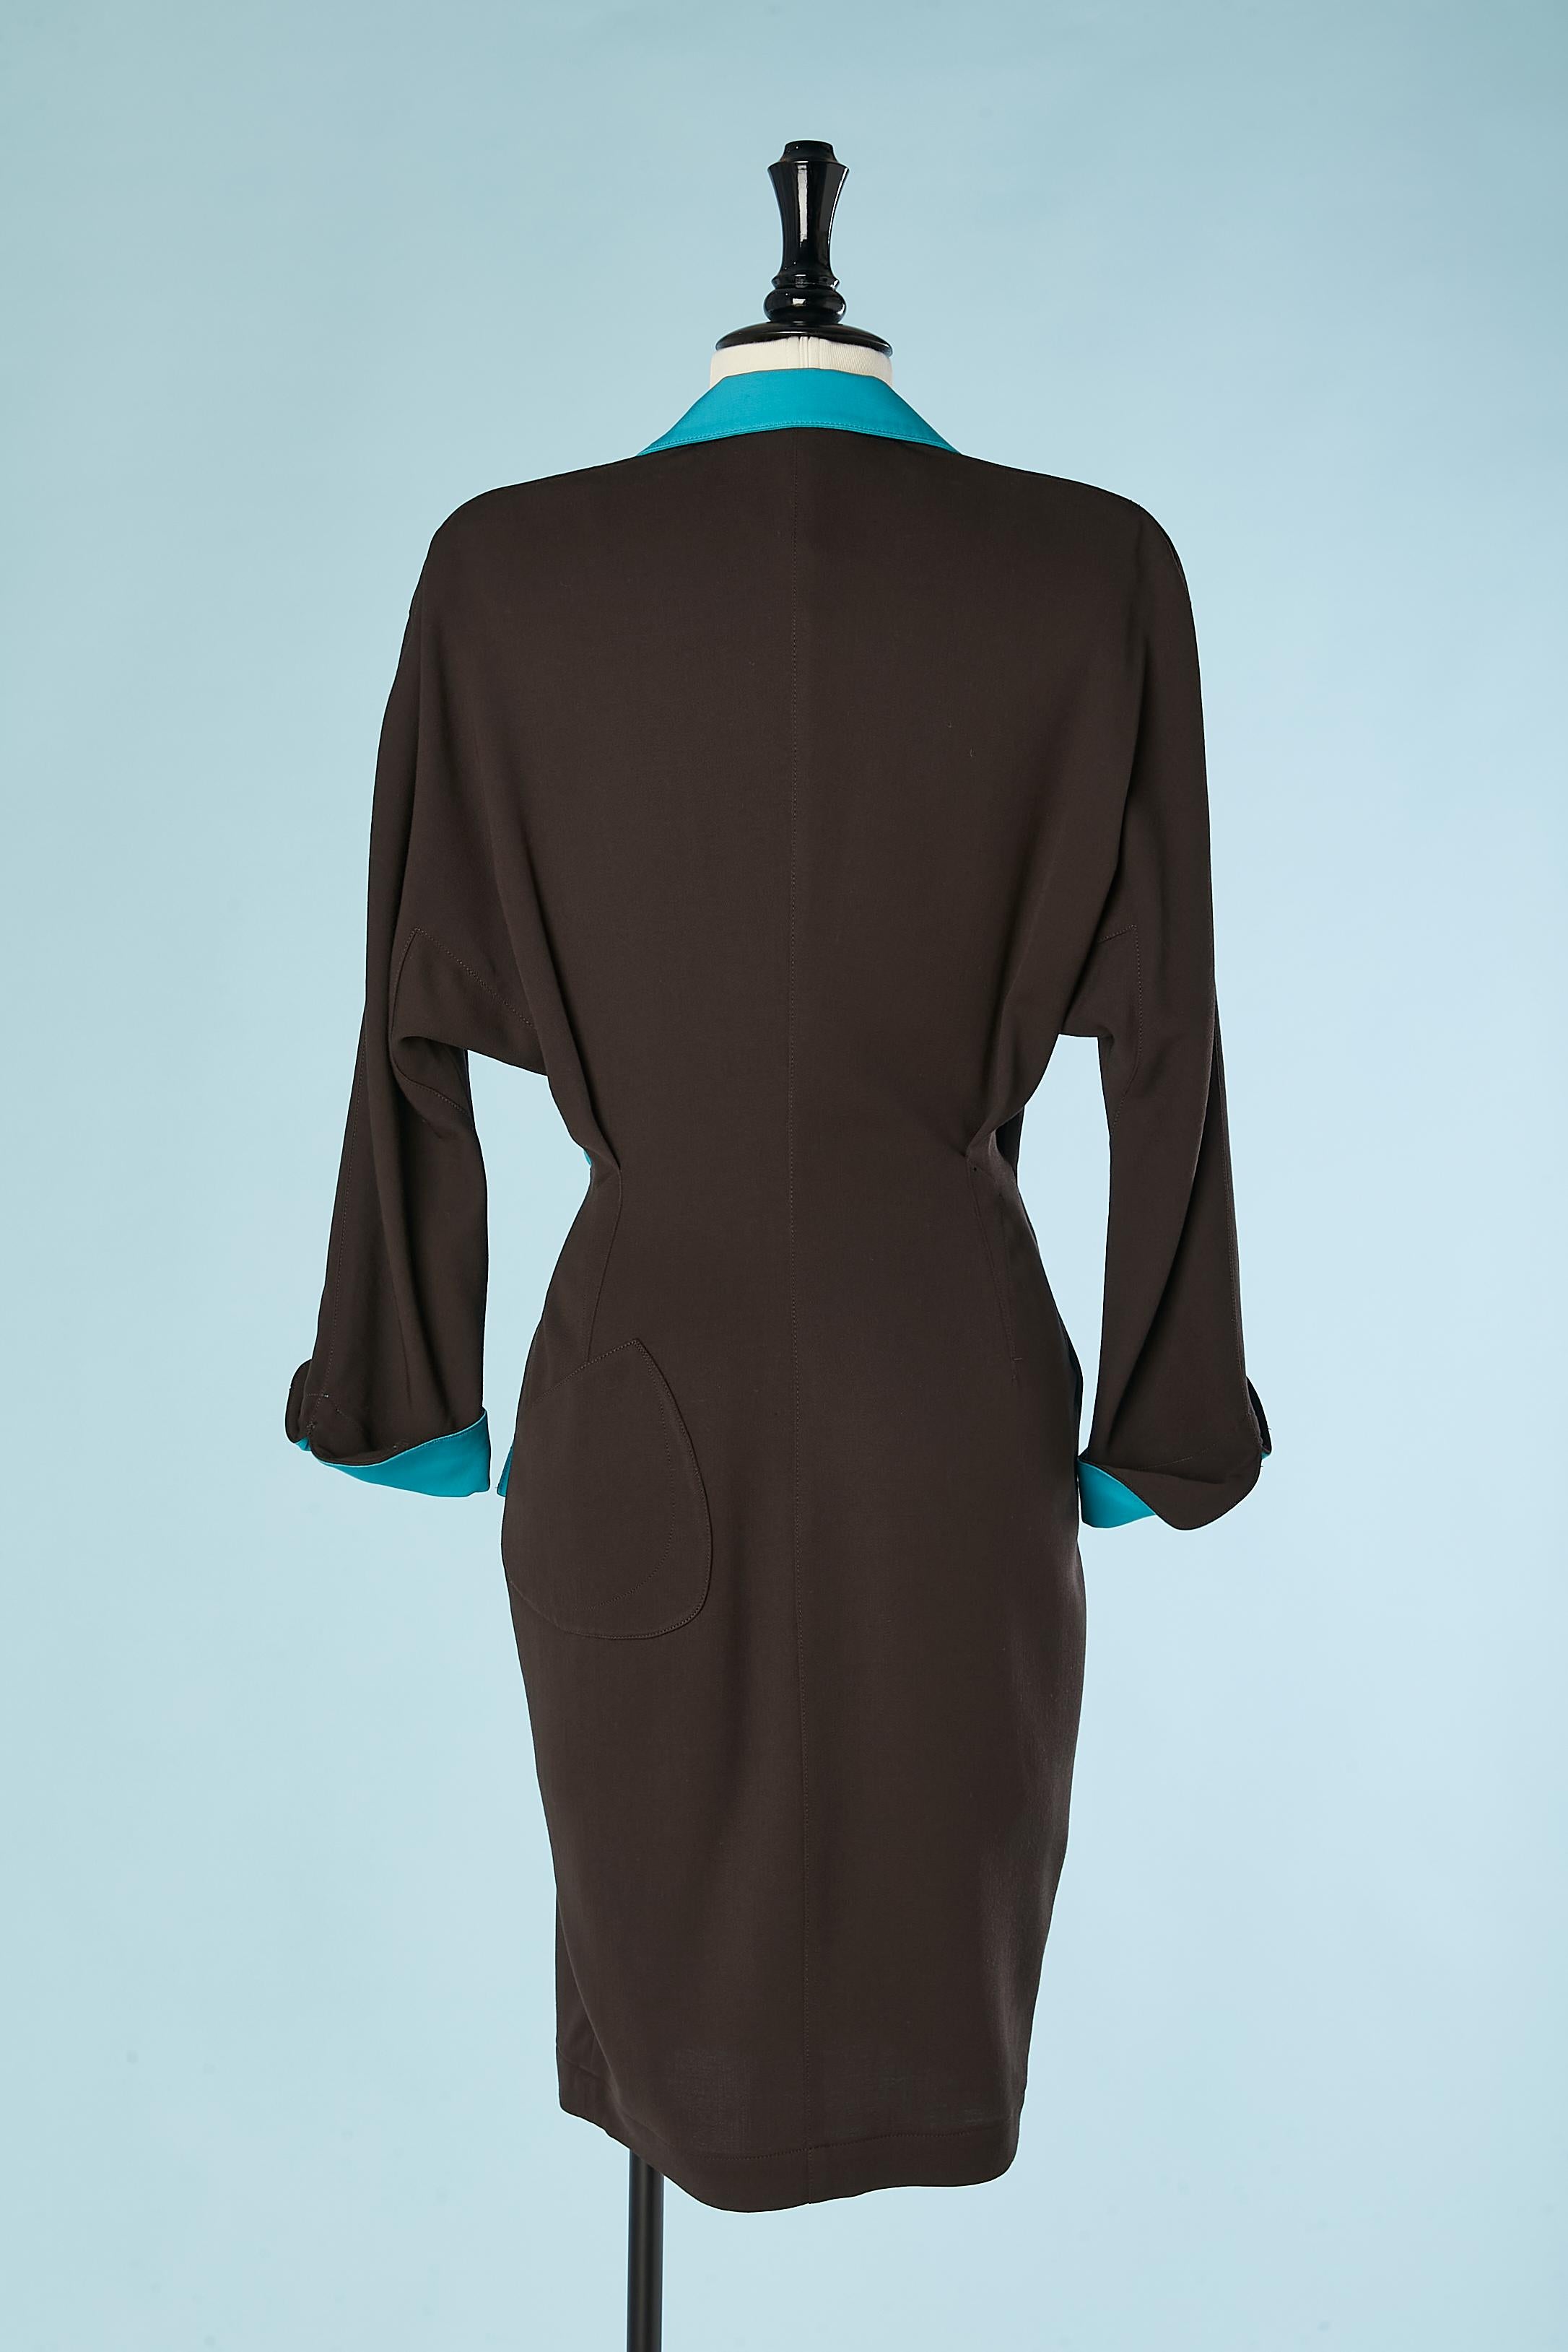 Dark brown  wrap dress in wool with turquoise collar and cuffs Thierry Mugler  For Sale 2